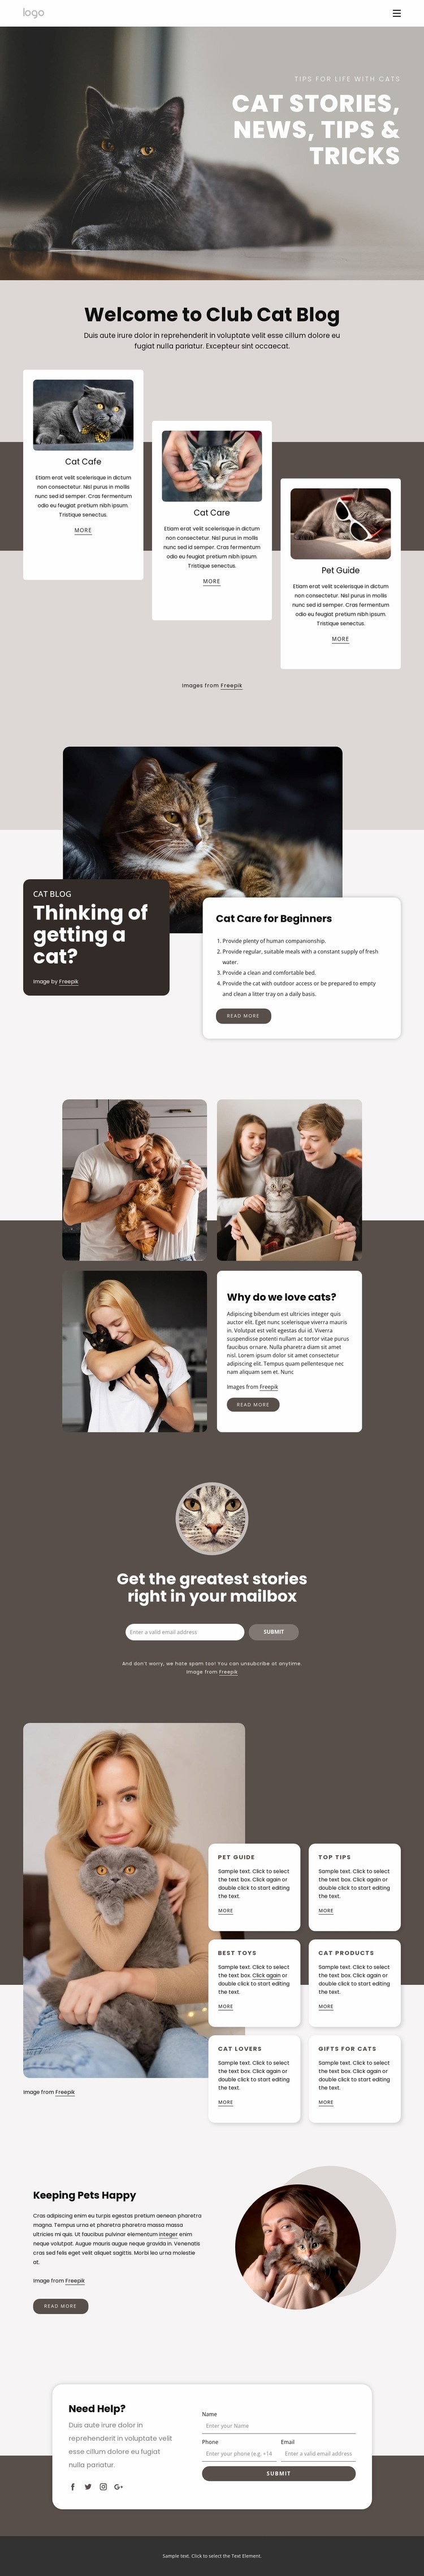 Cat stories, tips and tricks Homepage Design